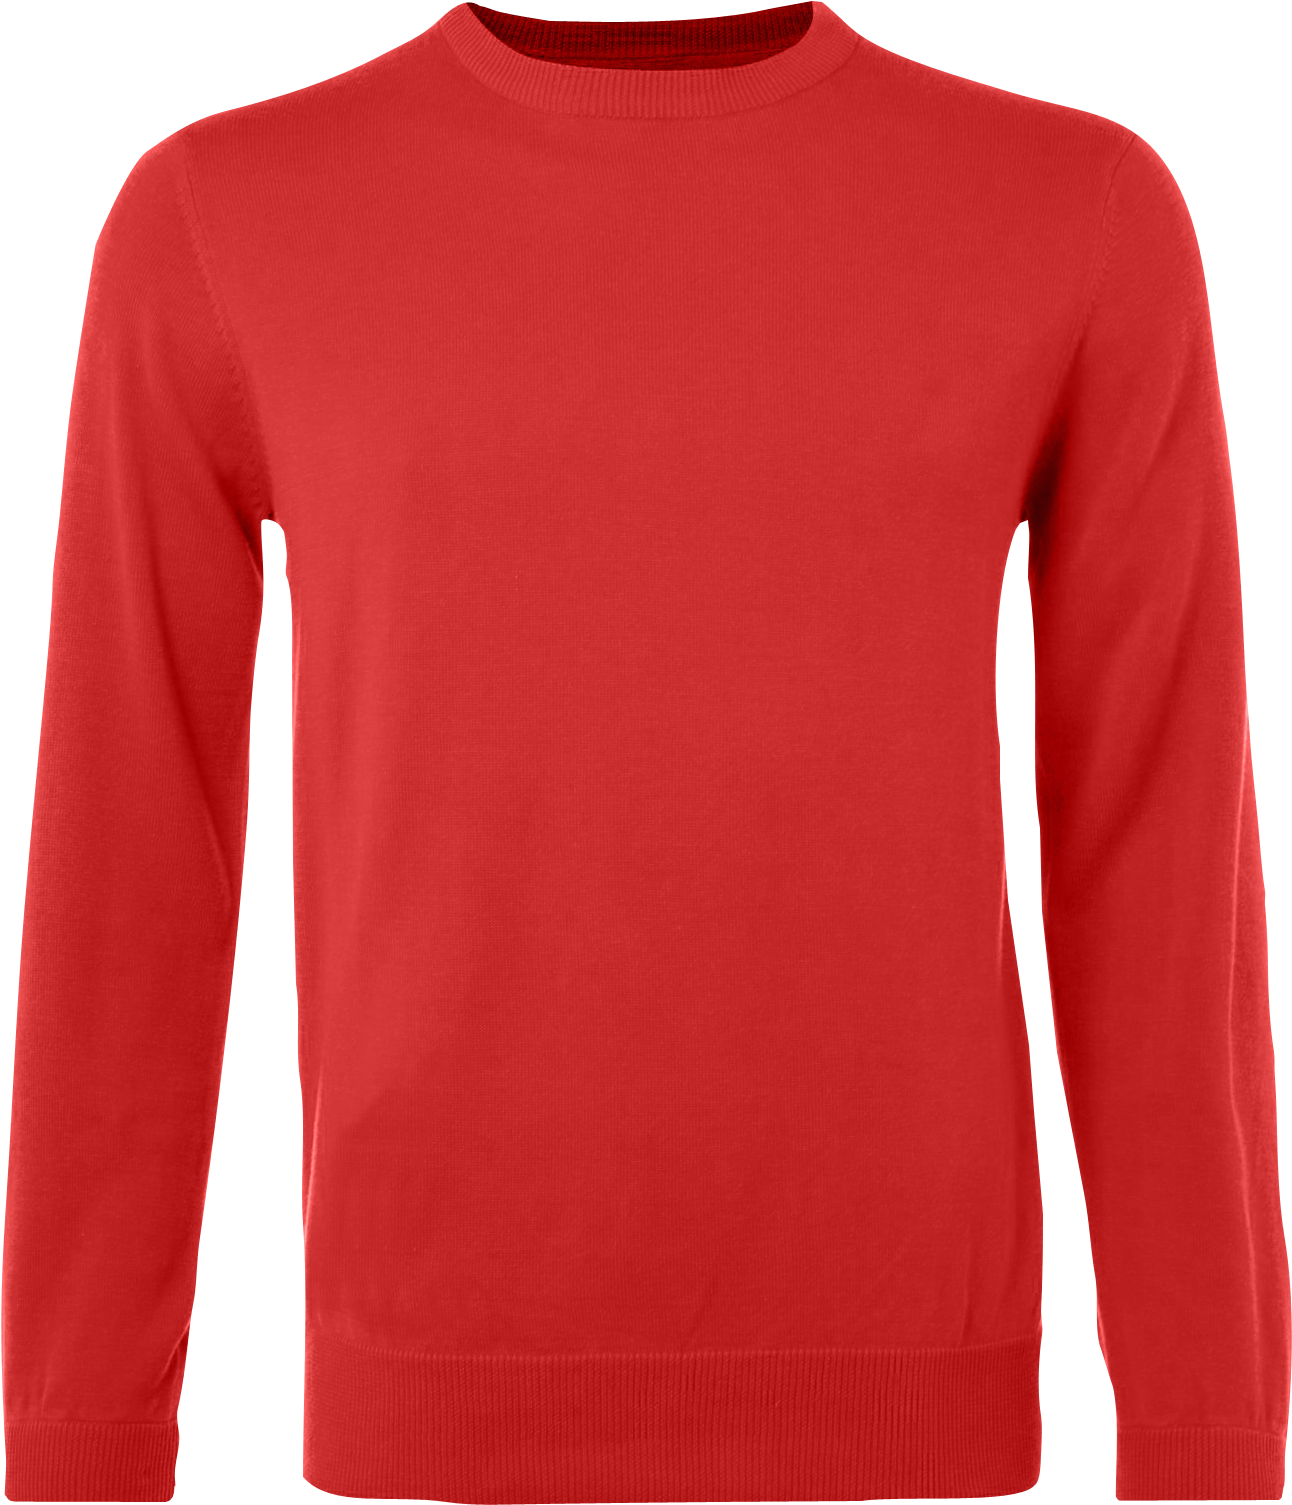 Jumper Sweater PNG Photo